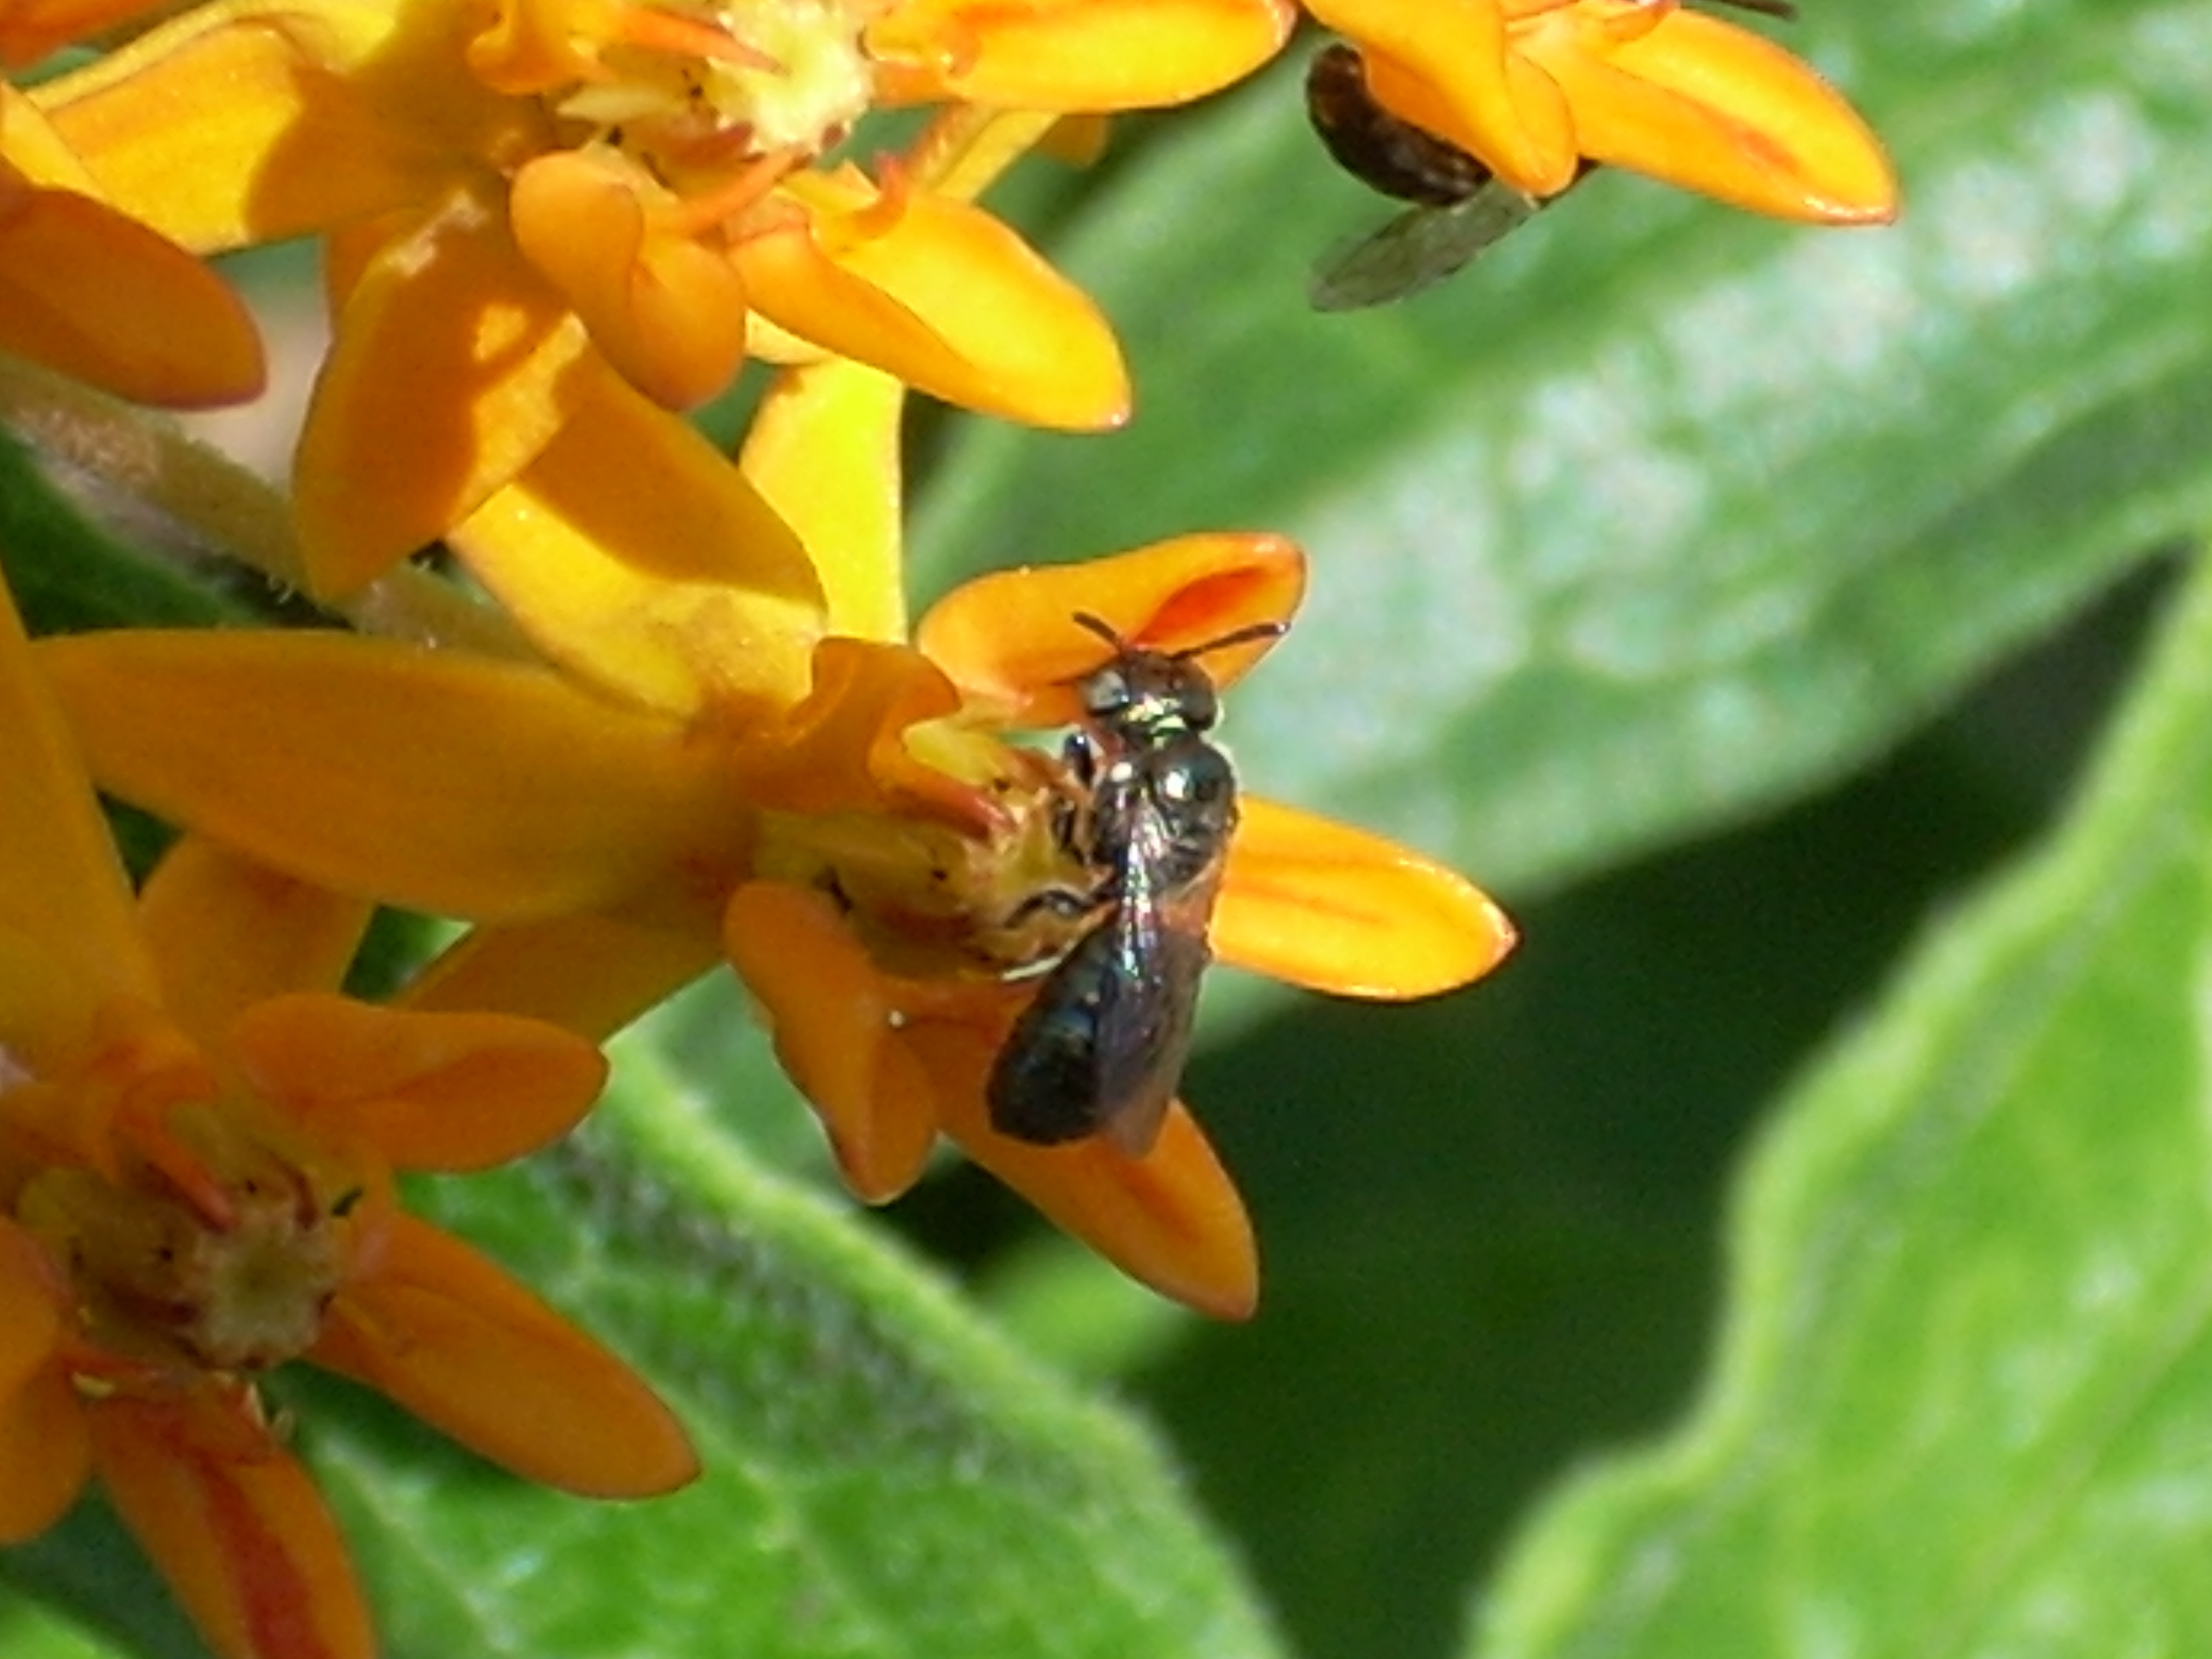 A native solitary bee feasts on nectar and pollen from butterfly weed (Asclepias tuberosa). This Virginia milkweed is also favored by butterflies.